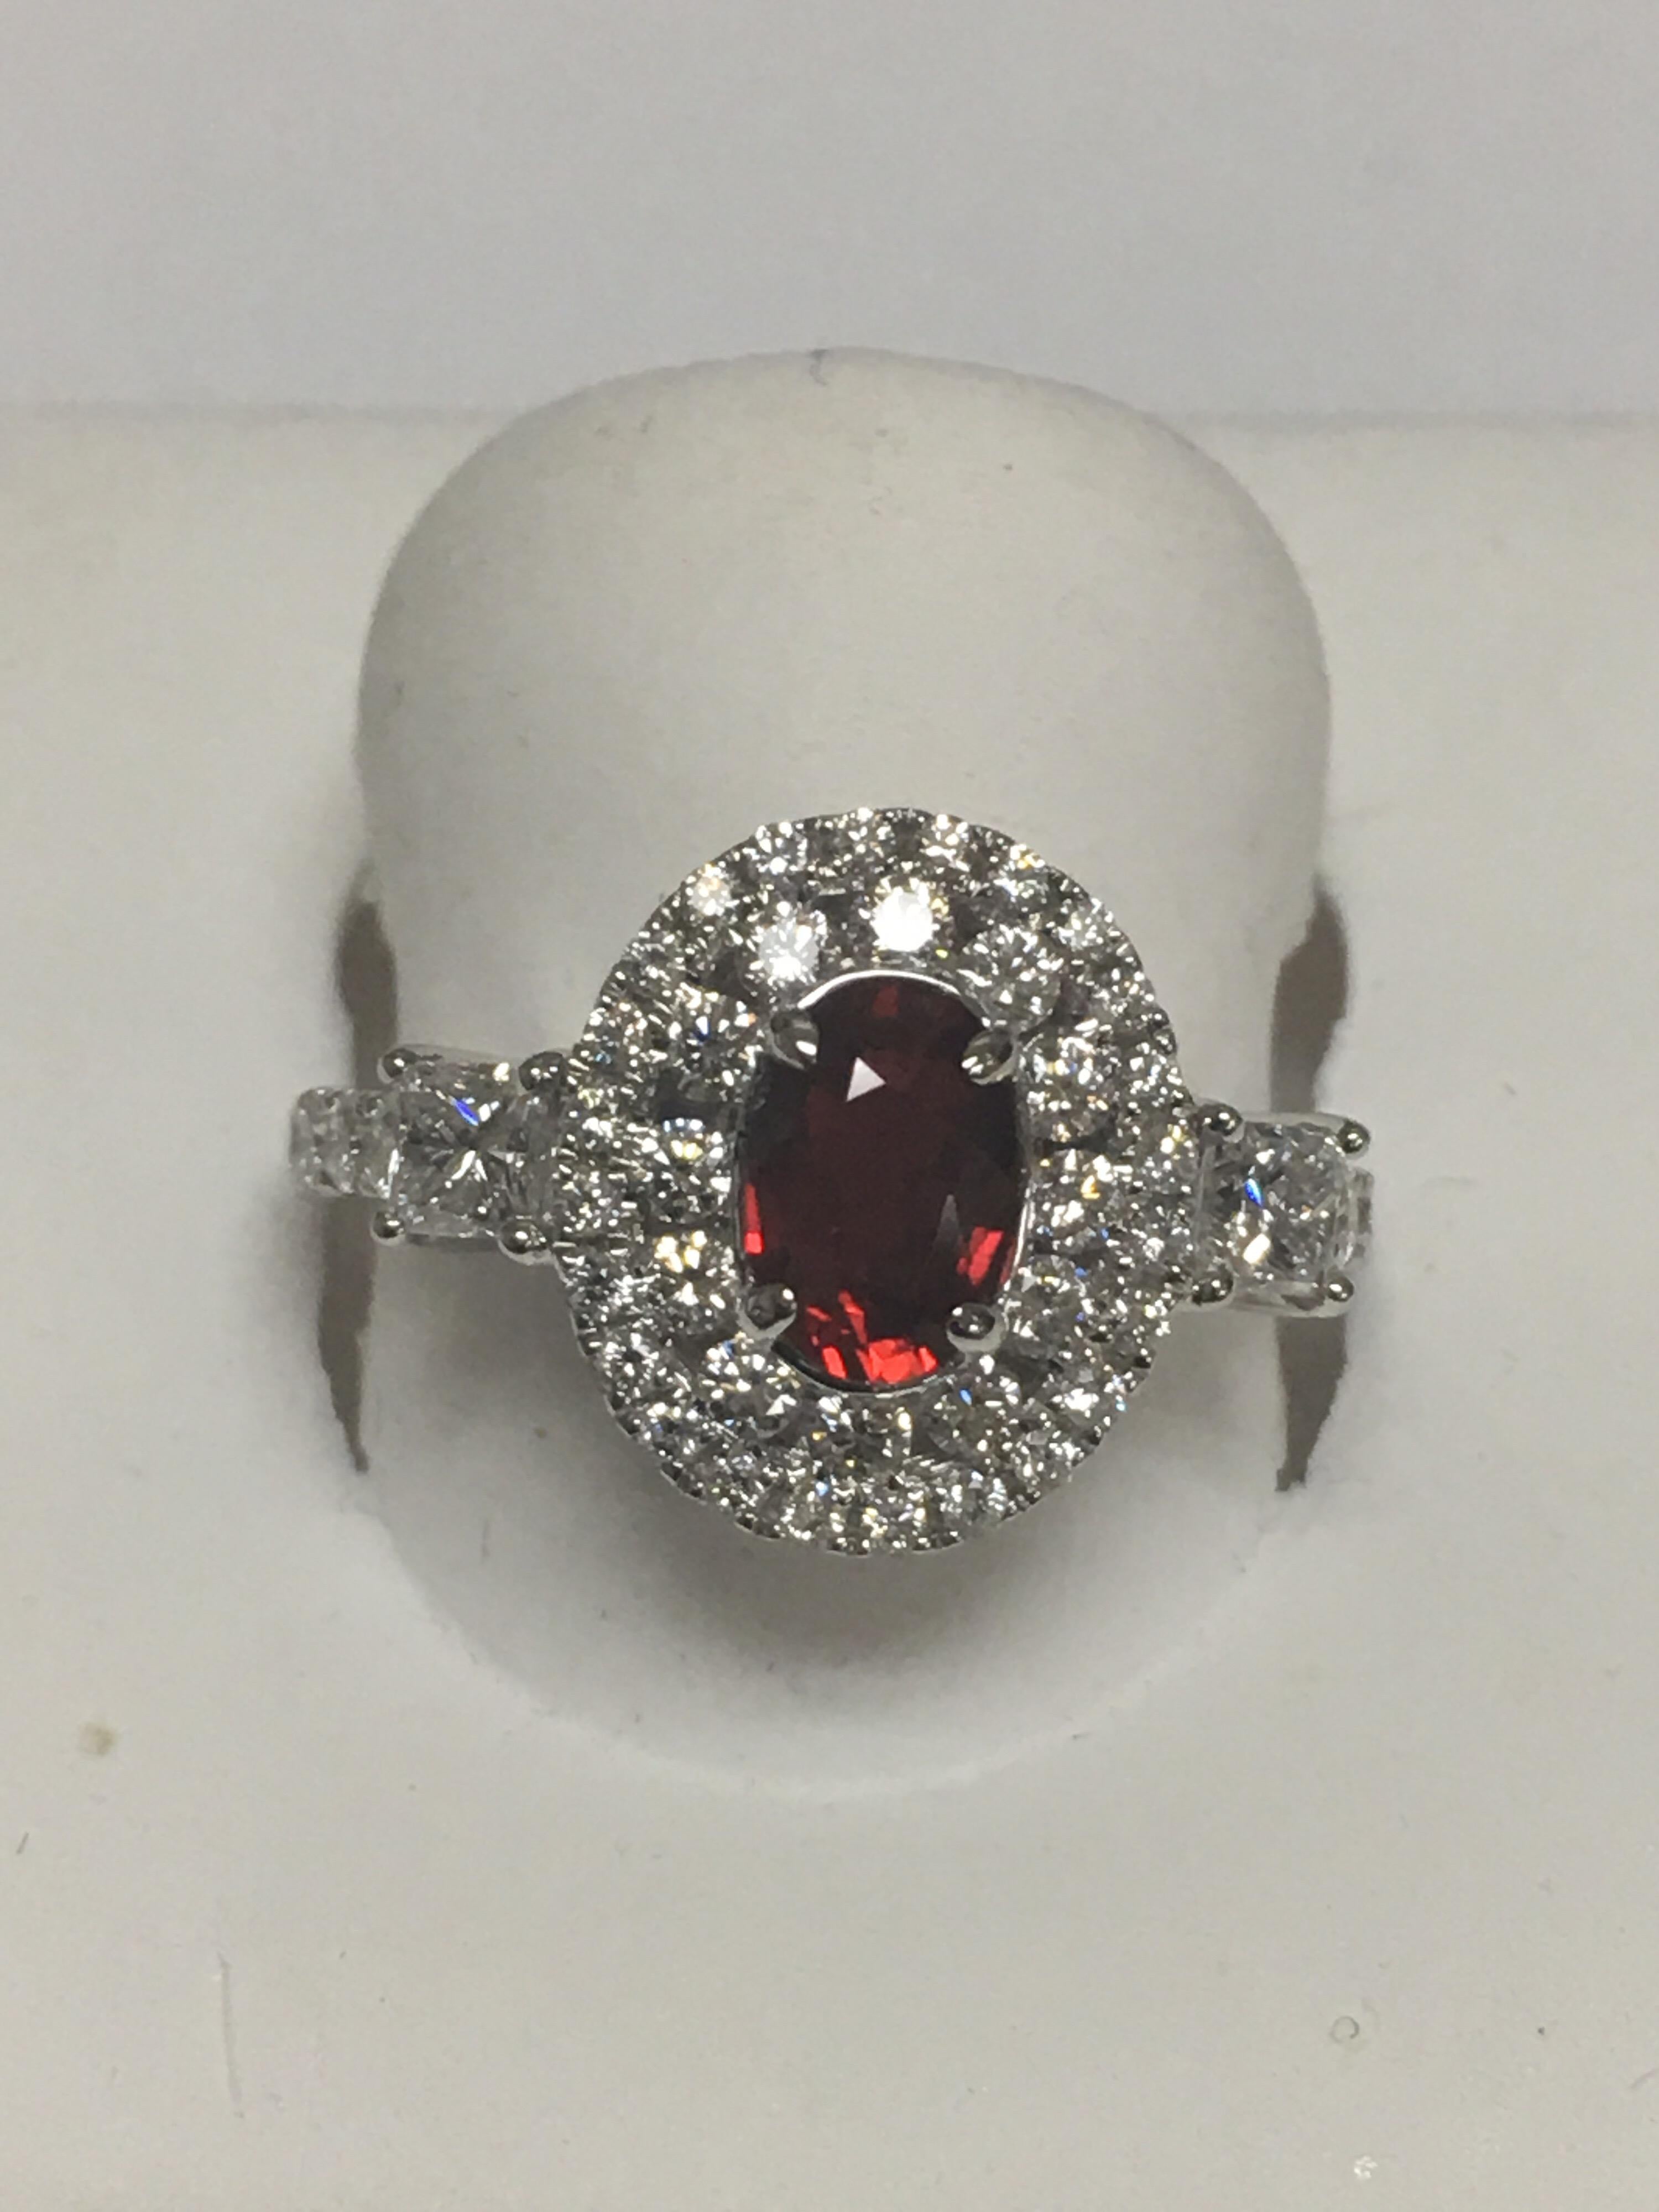 GIA Certified 1.06 Carat Ruby and 1.06 Carat White Diamonds accents set in 18 Karat white Gold.The Ring is handcrafted one of a kind by skilled craftsman.Size of the ring is 7 but can be resized if needed.